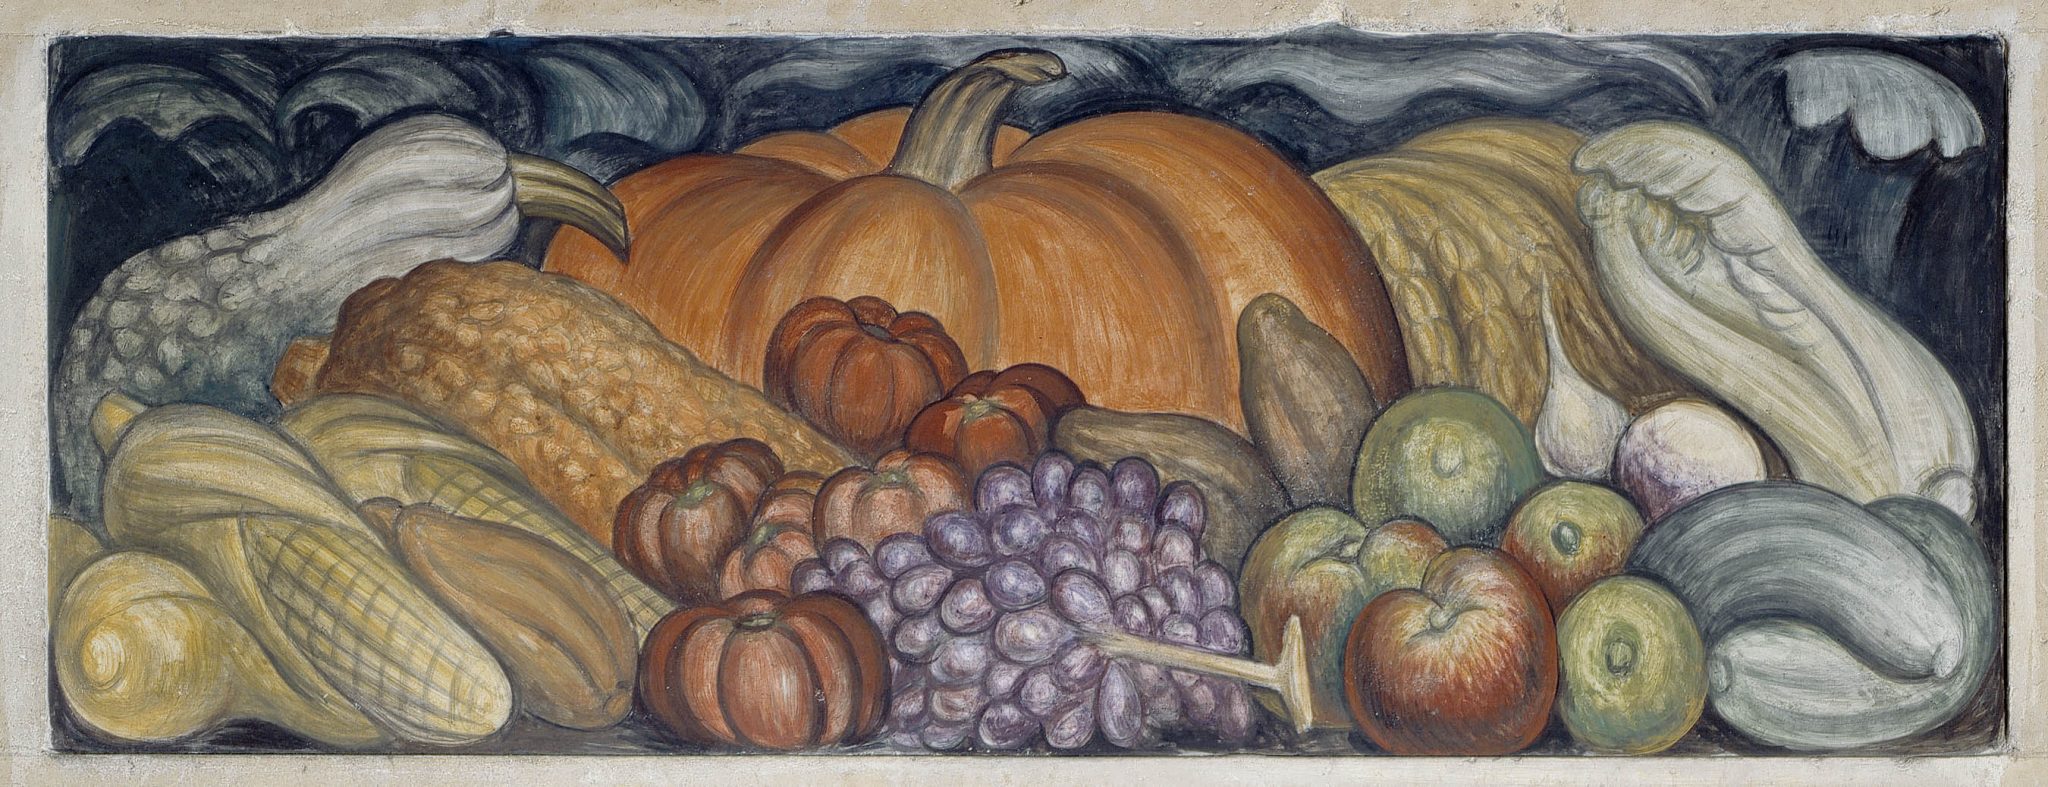 Detroit Industry, east wall - Michigan Fruits and Vegetables, Diego Rivera, 1932-33, fresco